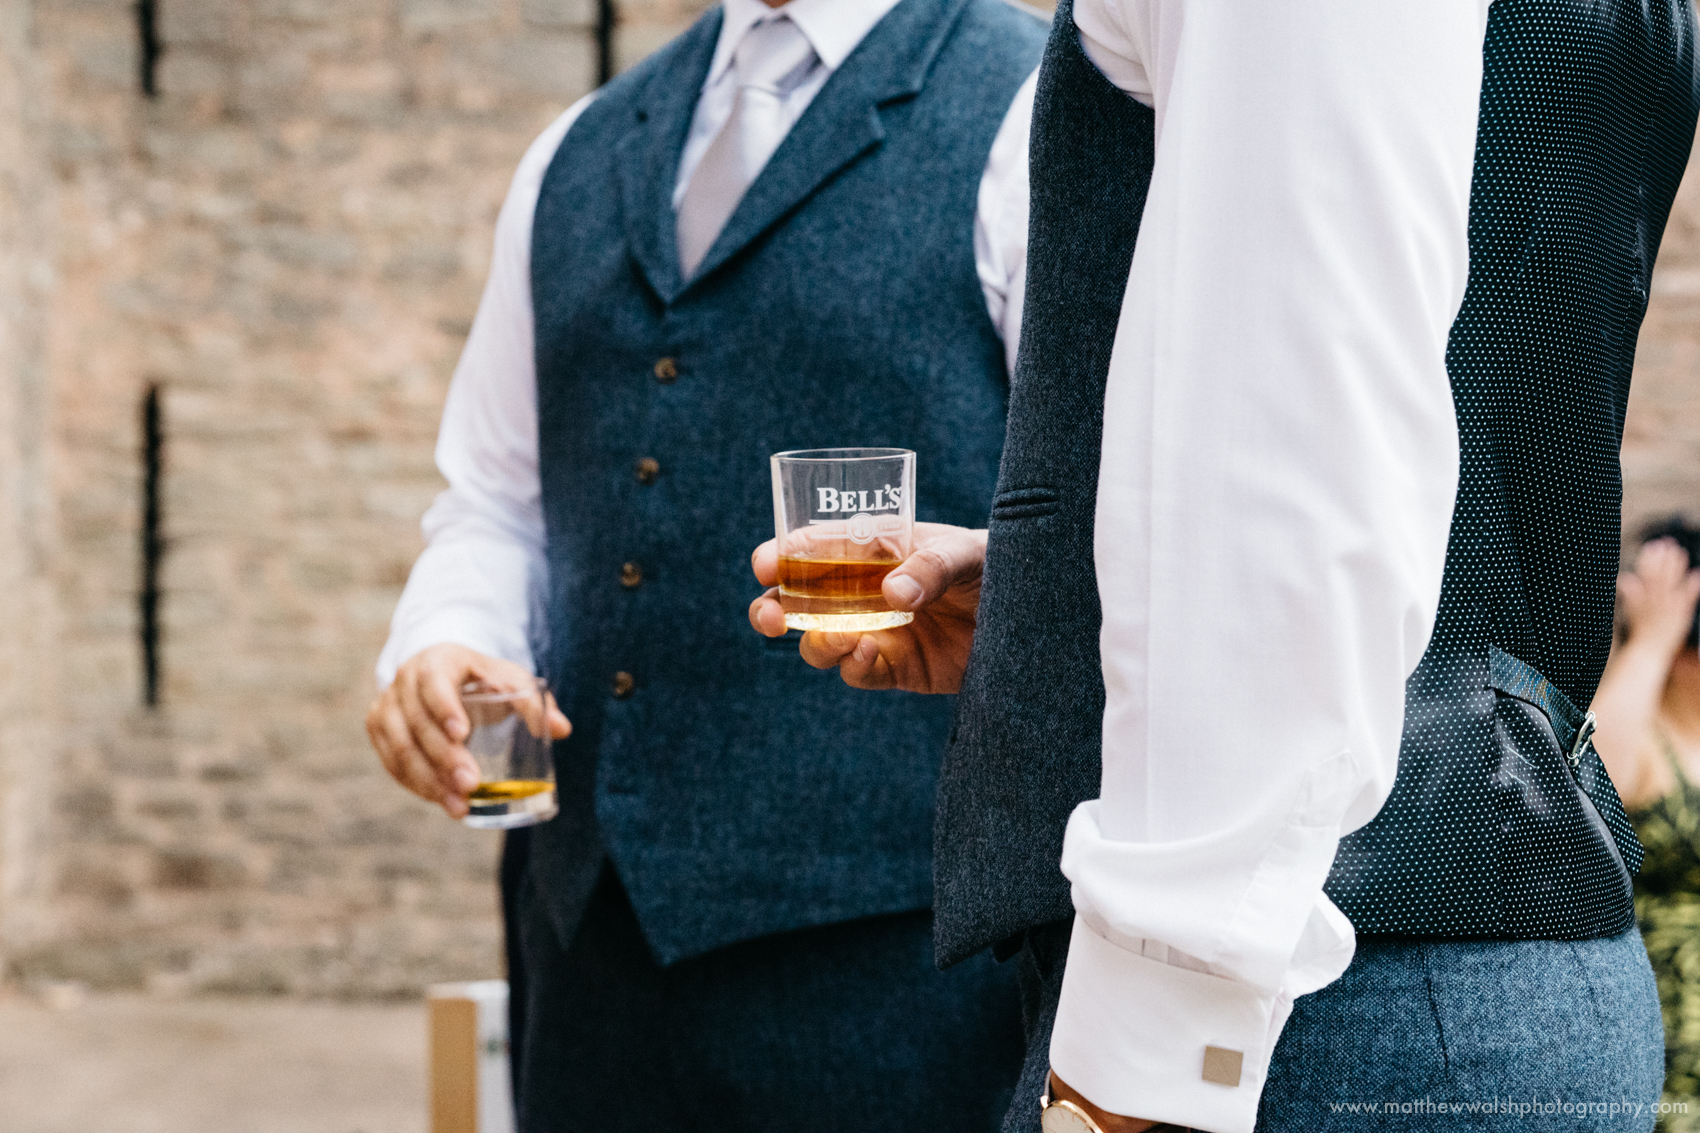 The groom calming his nerves a little more with a glass of whisky